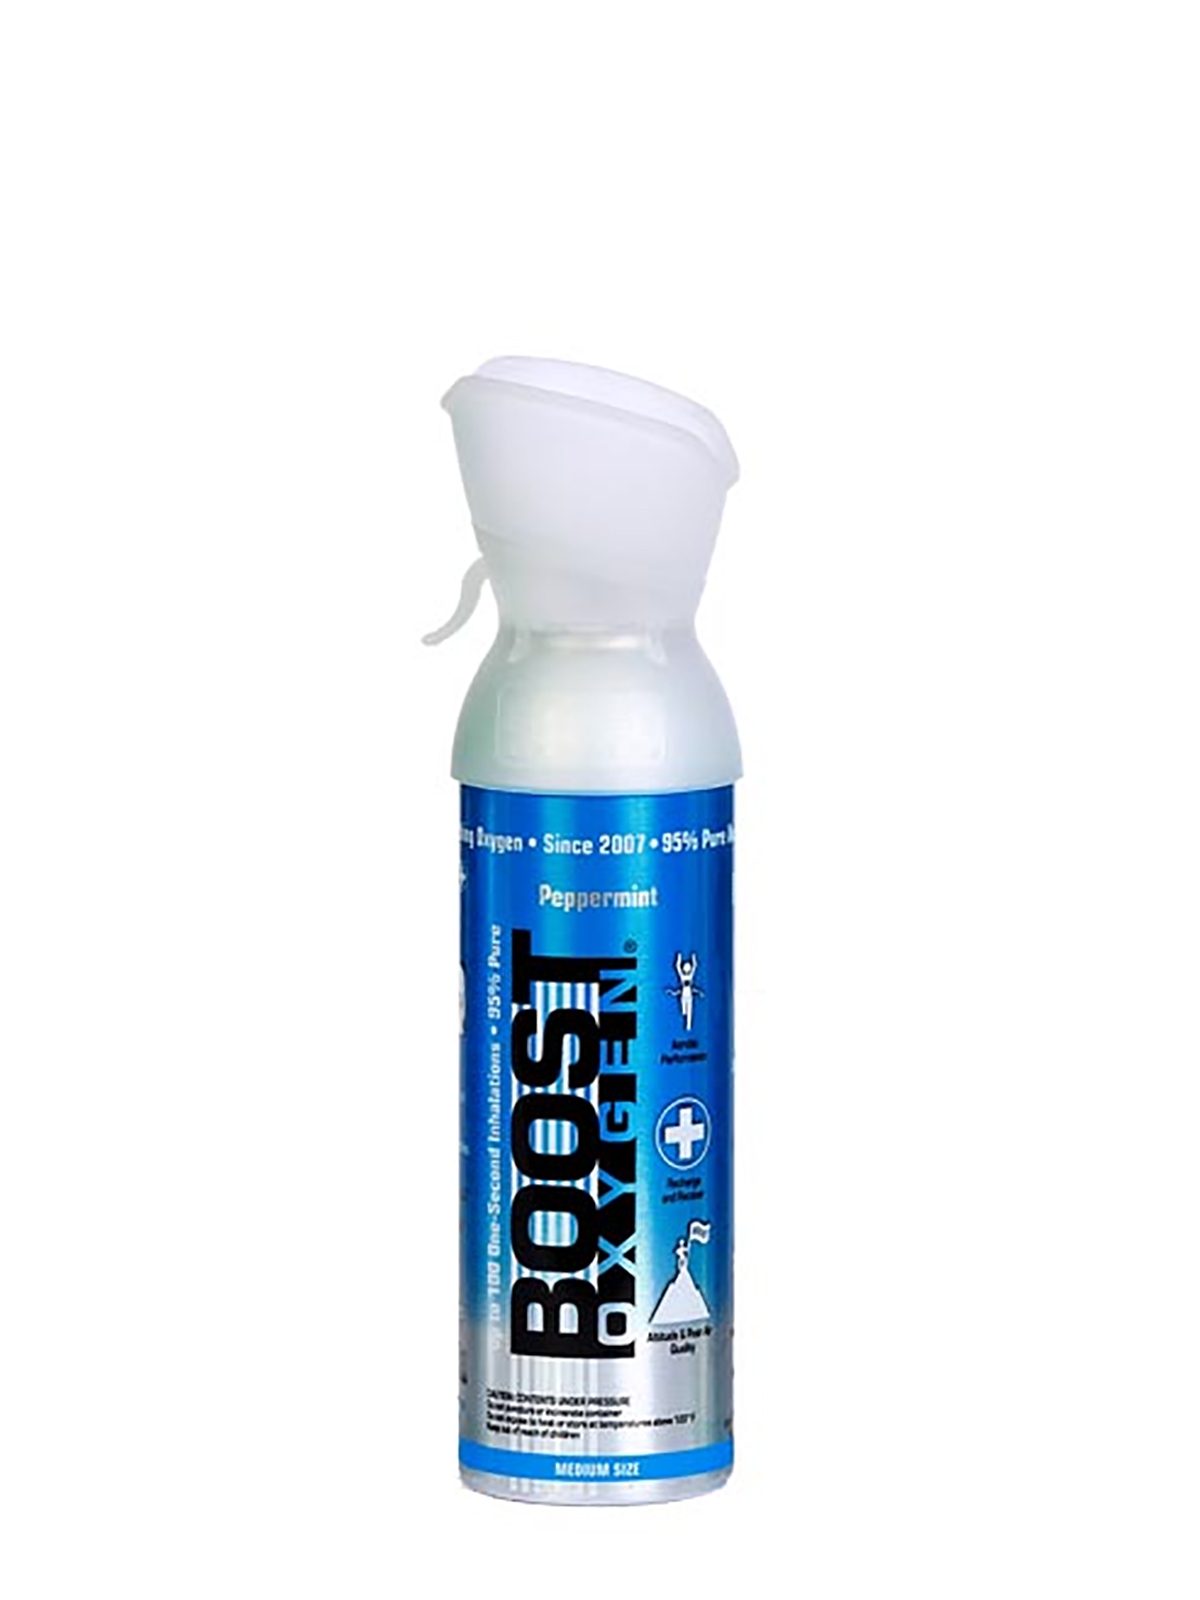 Boost Oxygen Peppermint - 95% pure oxygen with taste, 5 liters can